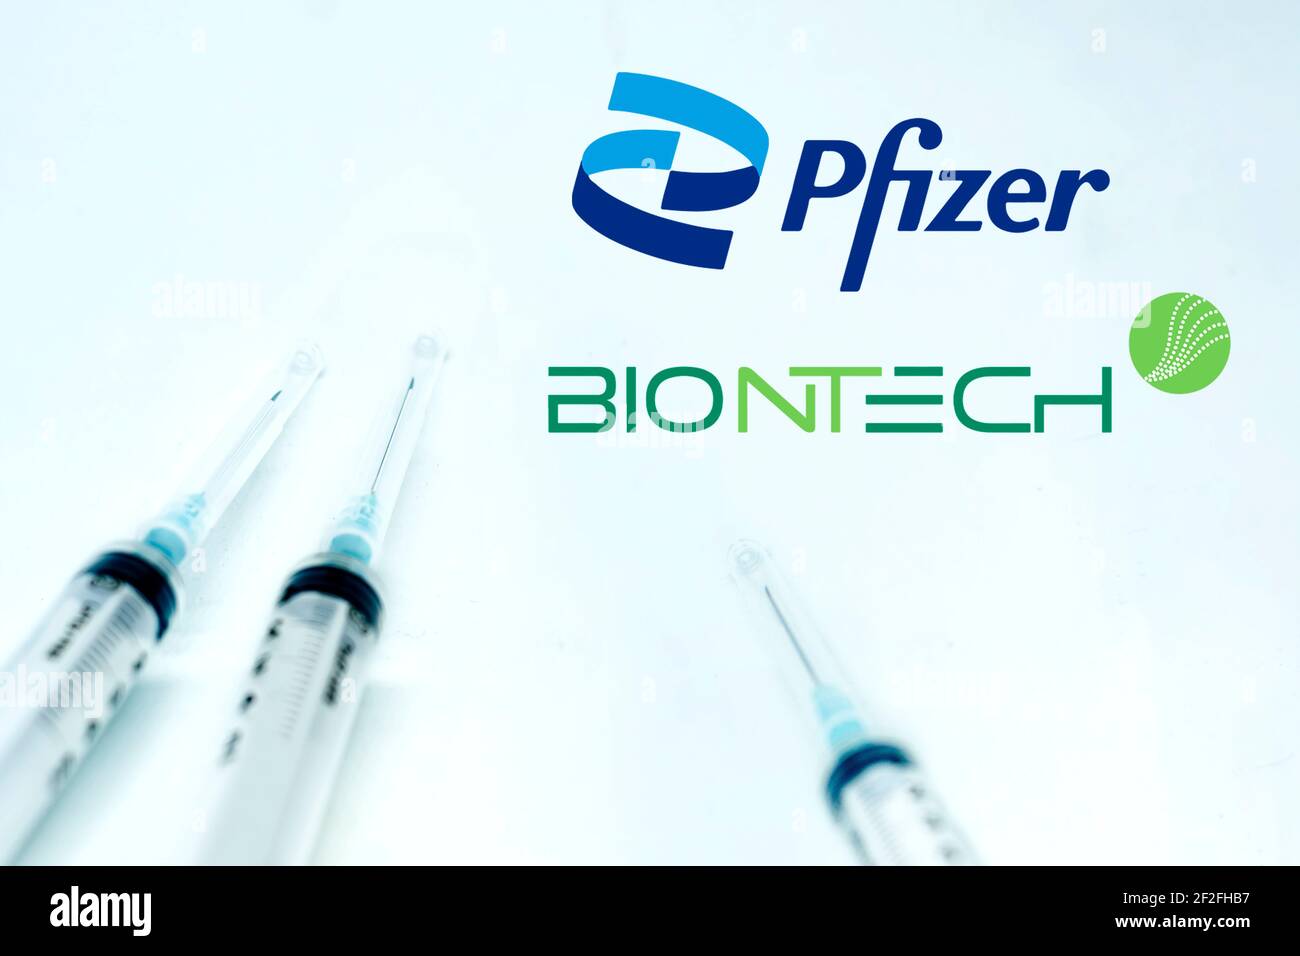 New York USA, february 10th 2021: three syringe next to the Pfizer BioNTech logo isolated on a white background. Health and prevention.Pfizer Biontech Stock Photo